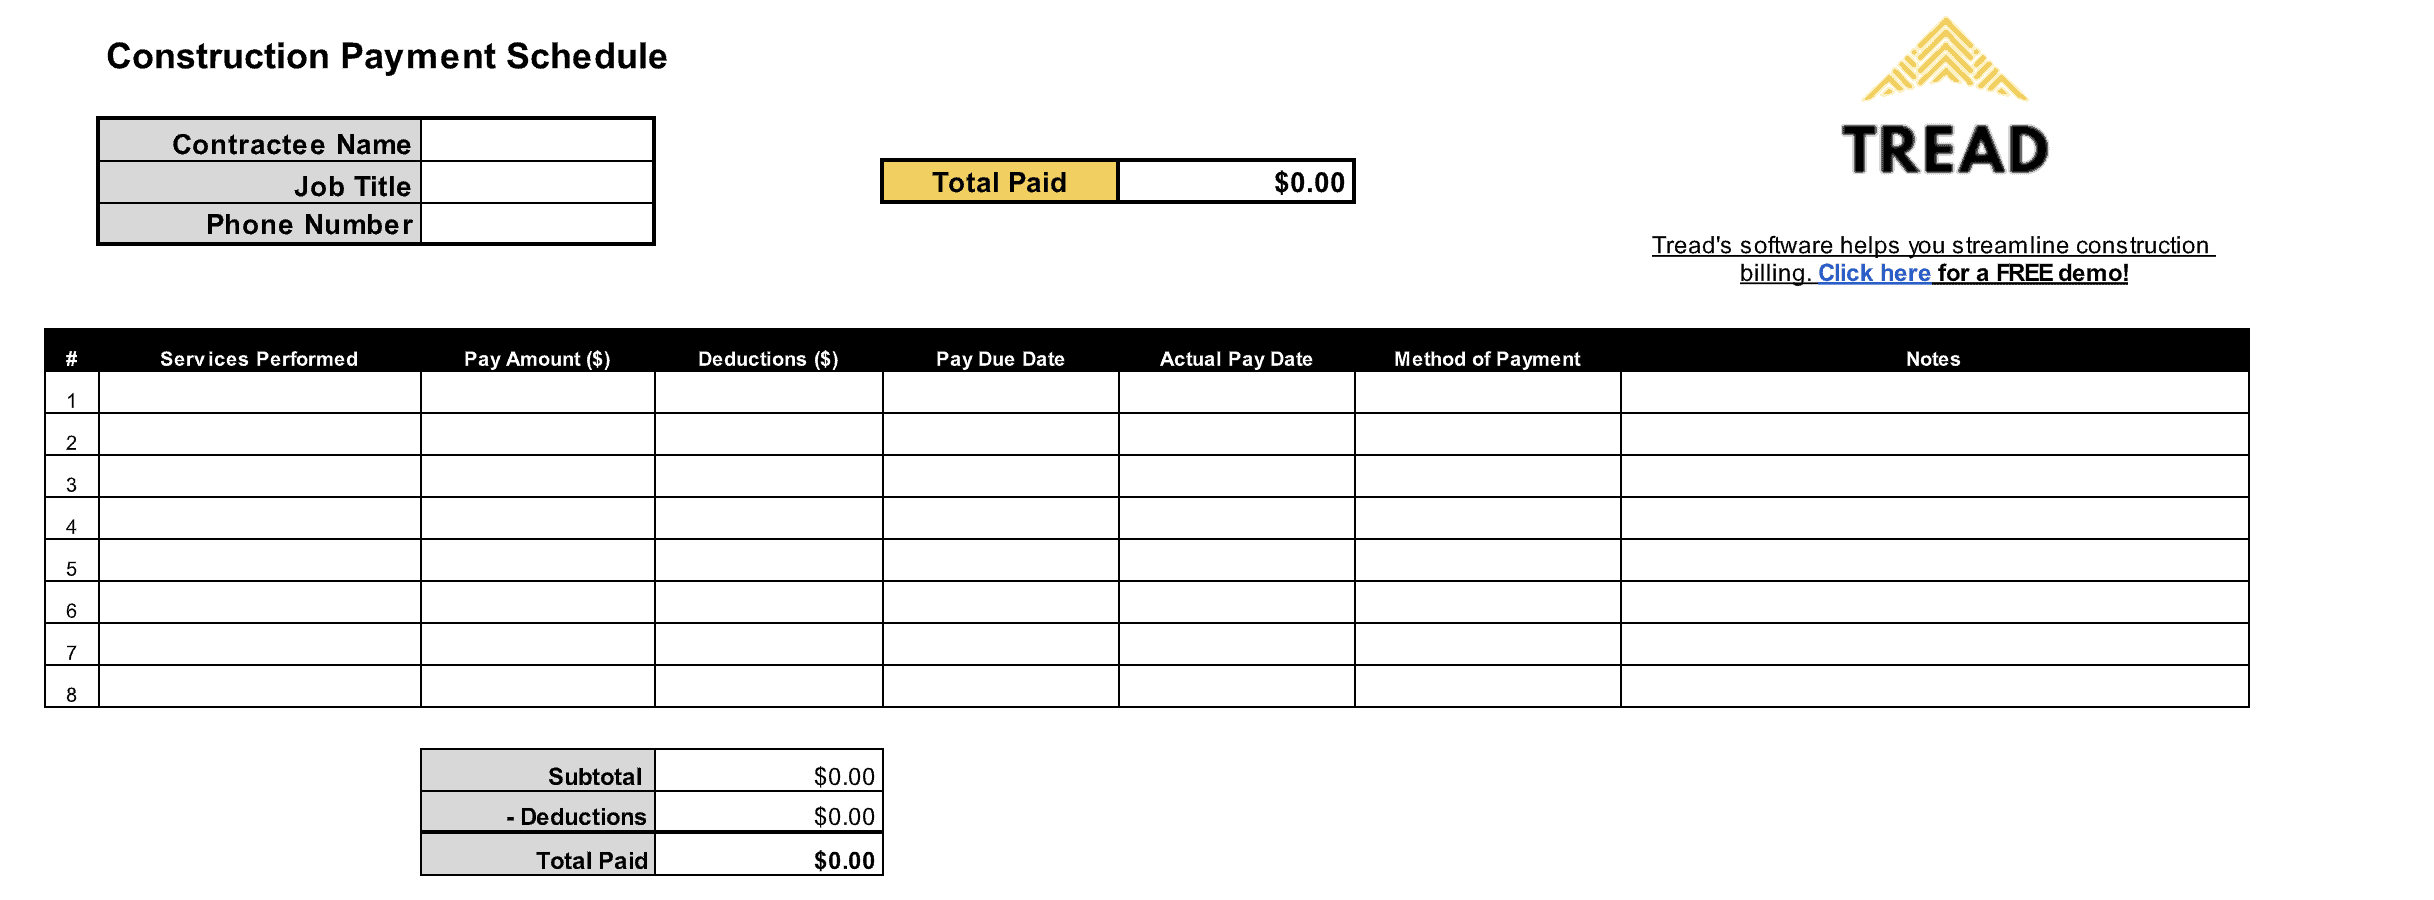 construction-payment-schedule-template-free-download